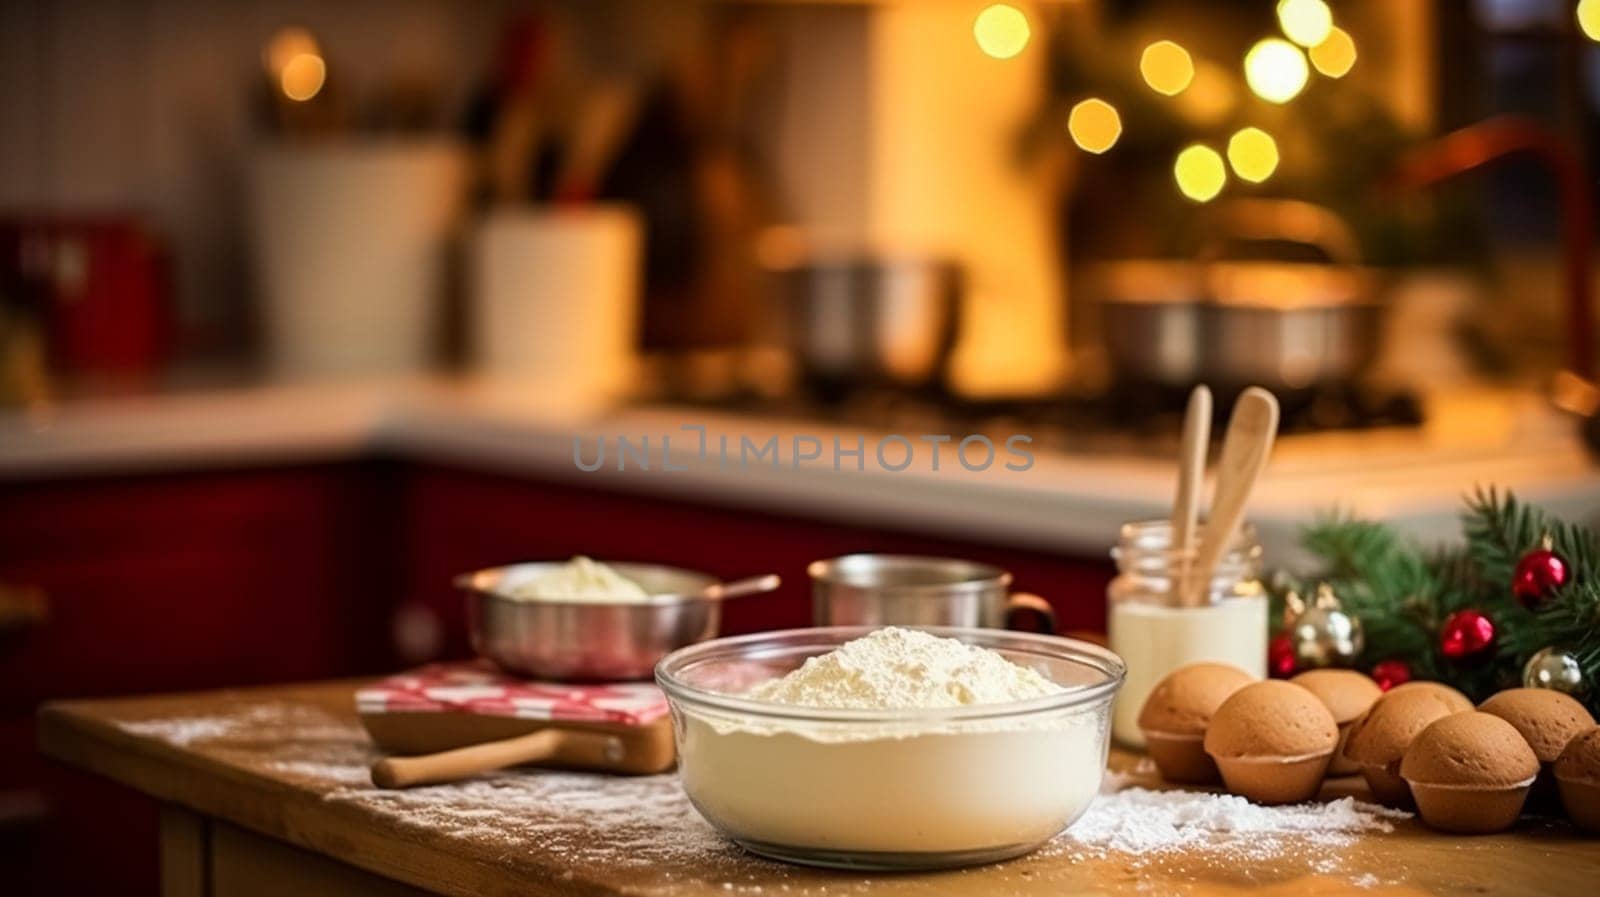 Christmas baking, holidays recipe and home cooking, holiday bakes, ingredients and preparation in English country cottage kitchen, homemade food and cookbook idea